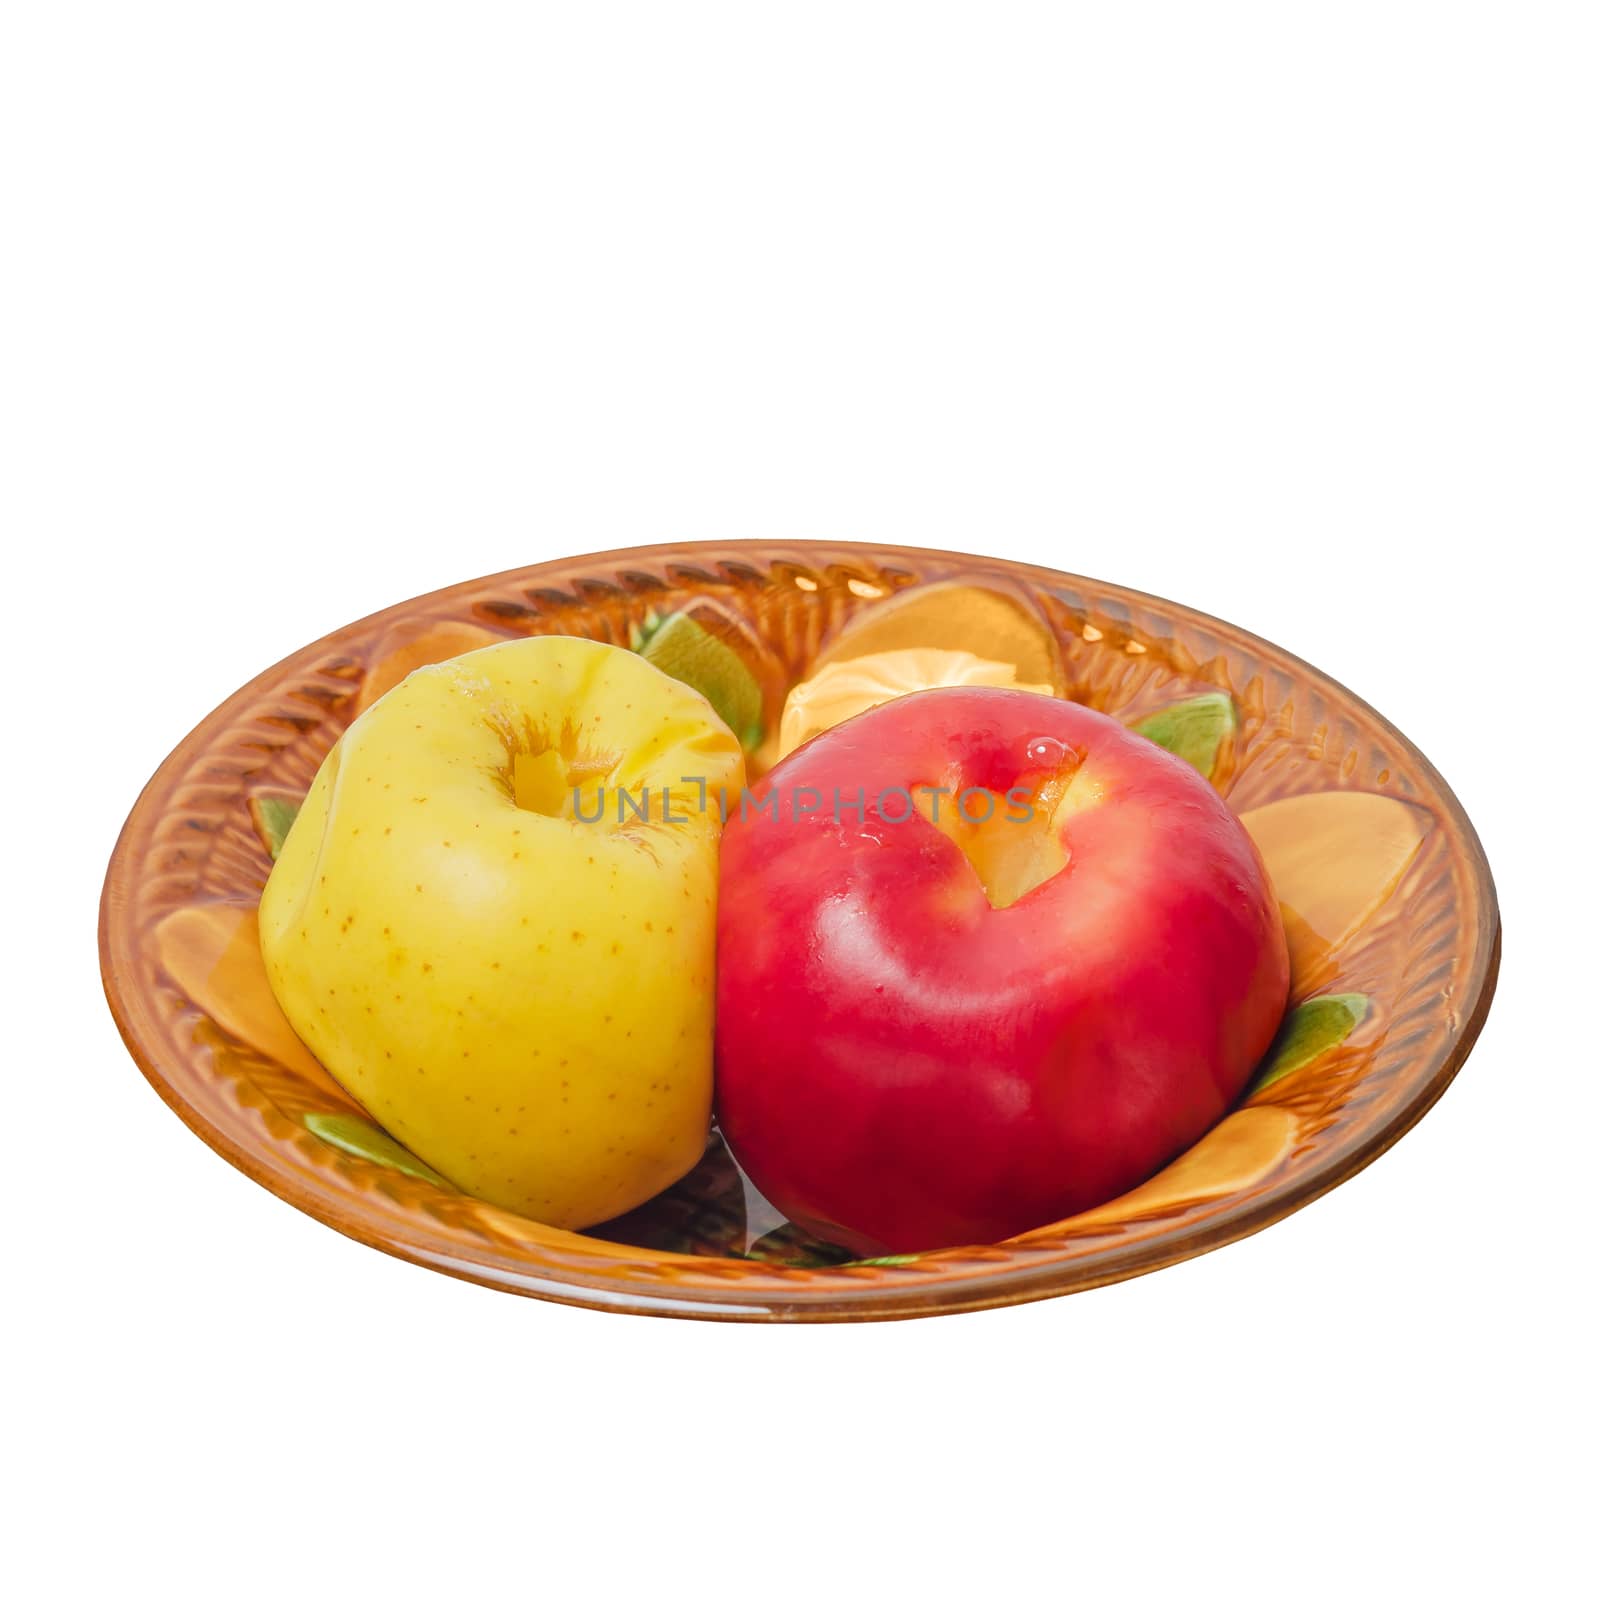 Two baked apples, red and yellow in a ceramic bowl. Isolated on a white background.